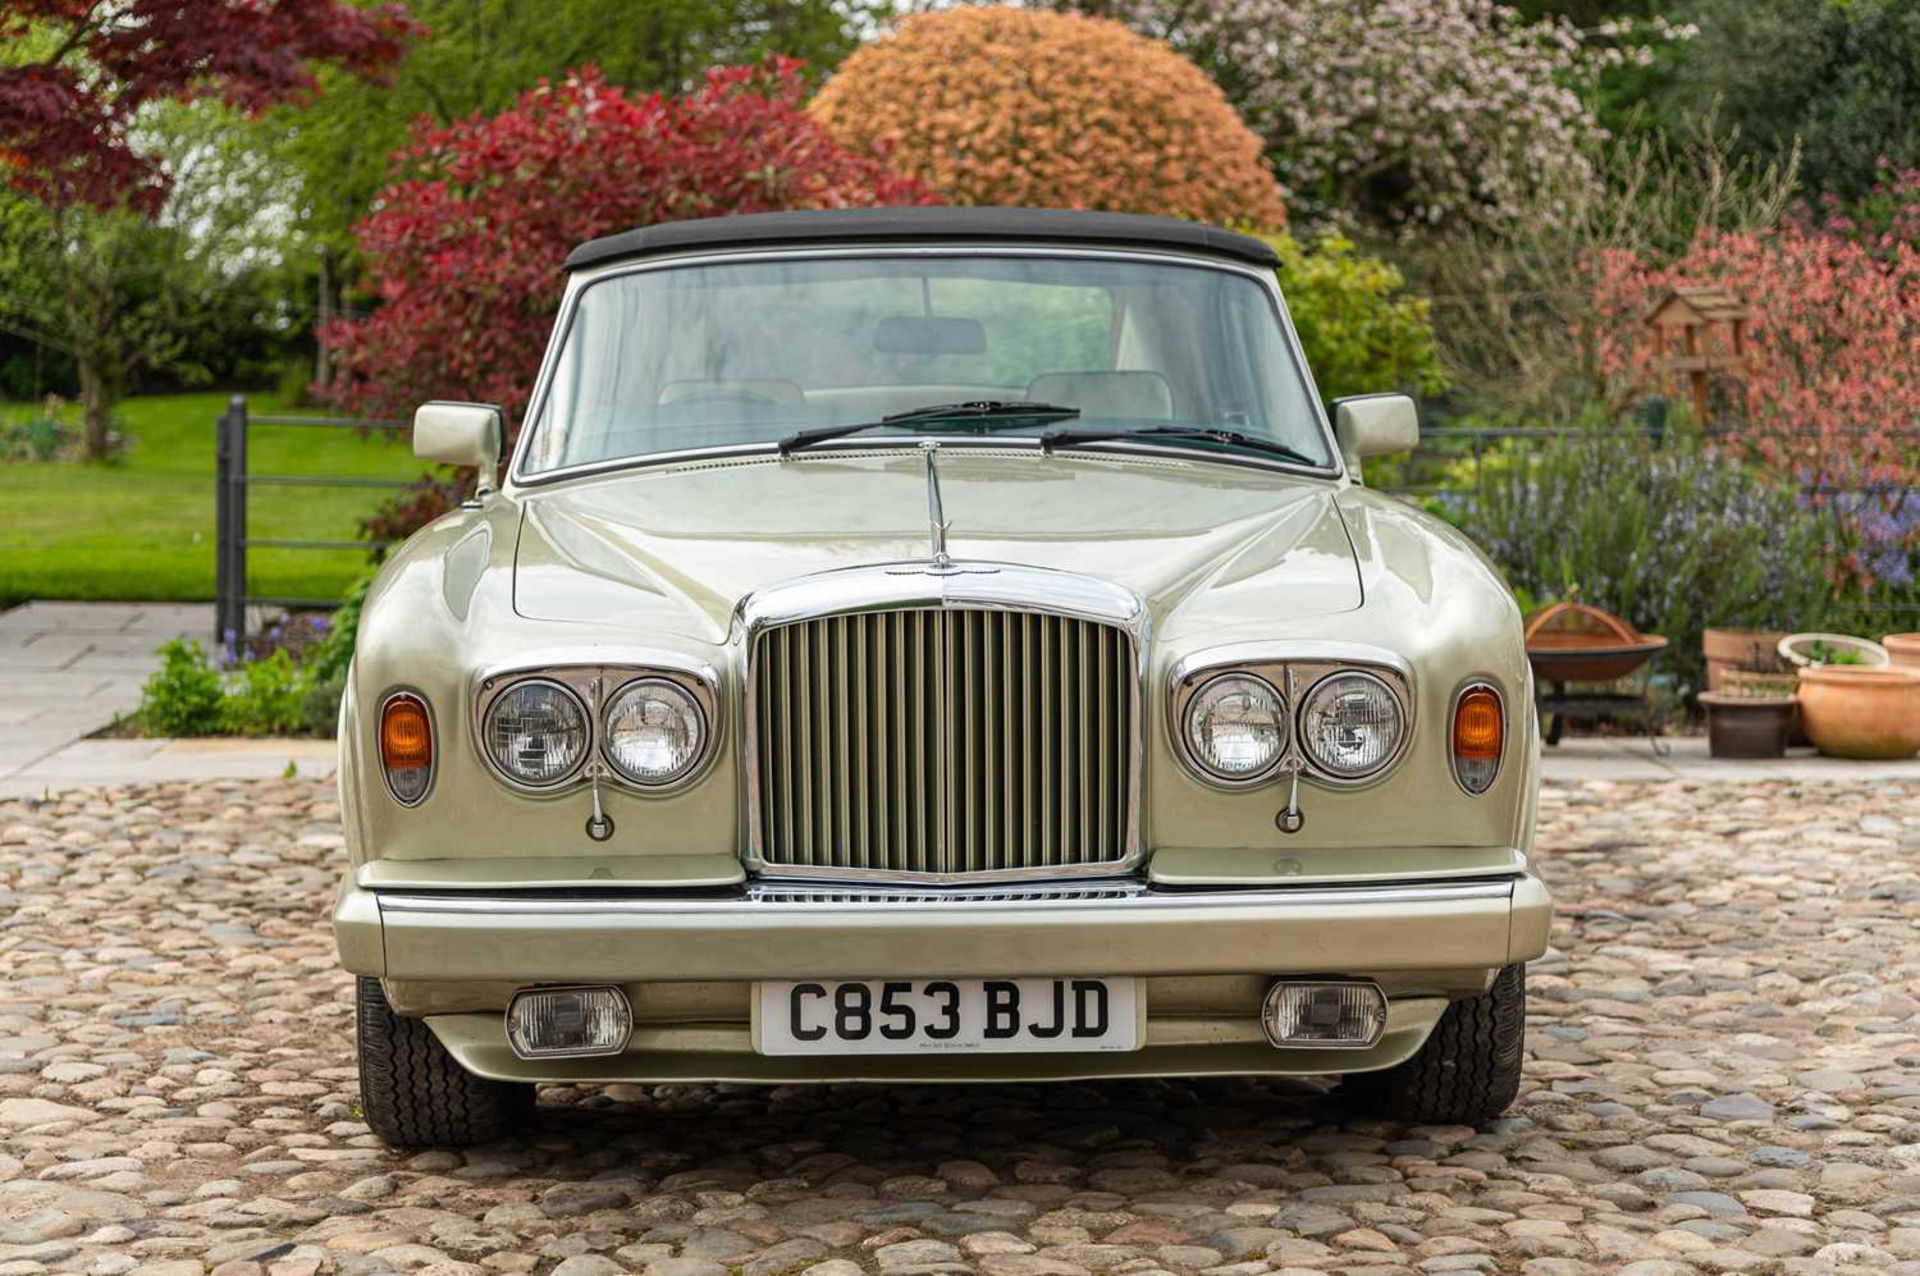 1985 Bentley Continental Convertible Rare early carburettor model by Mulliner Park Ward - Image 3 of 76